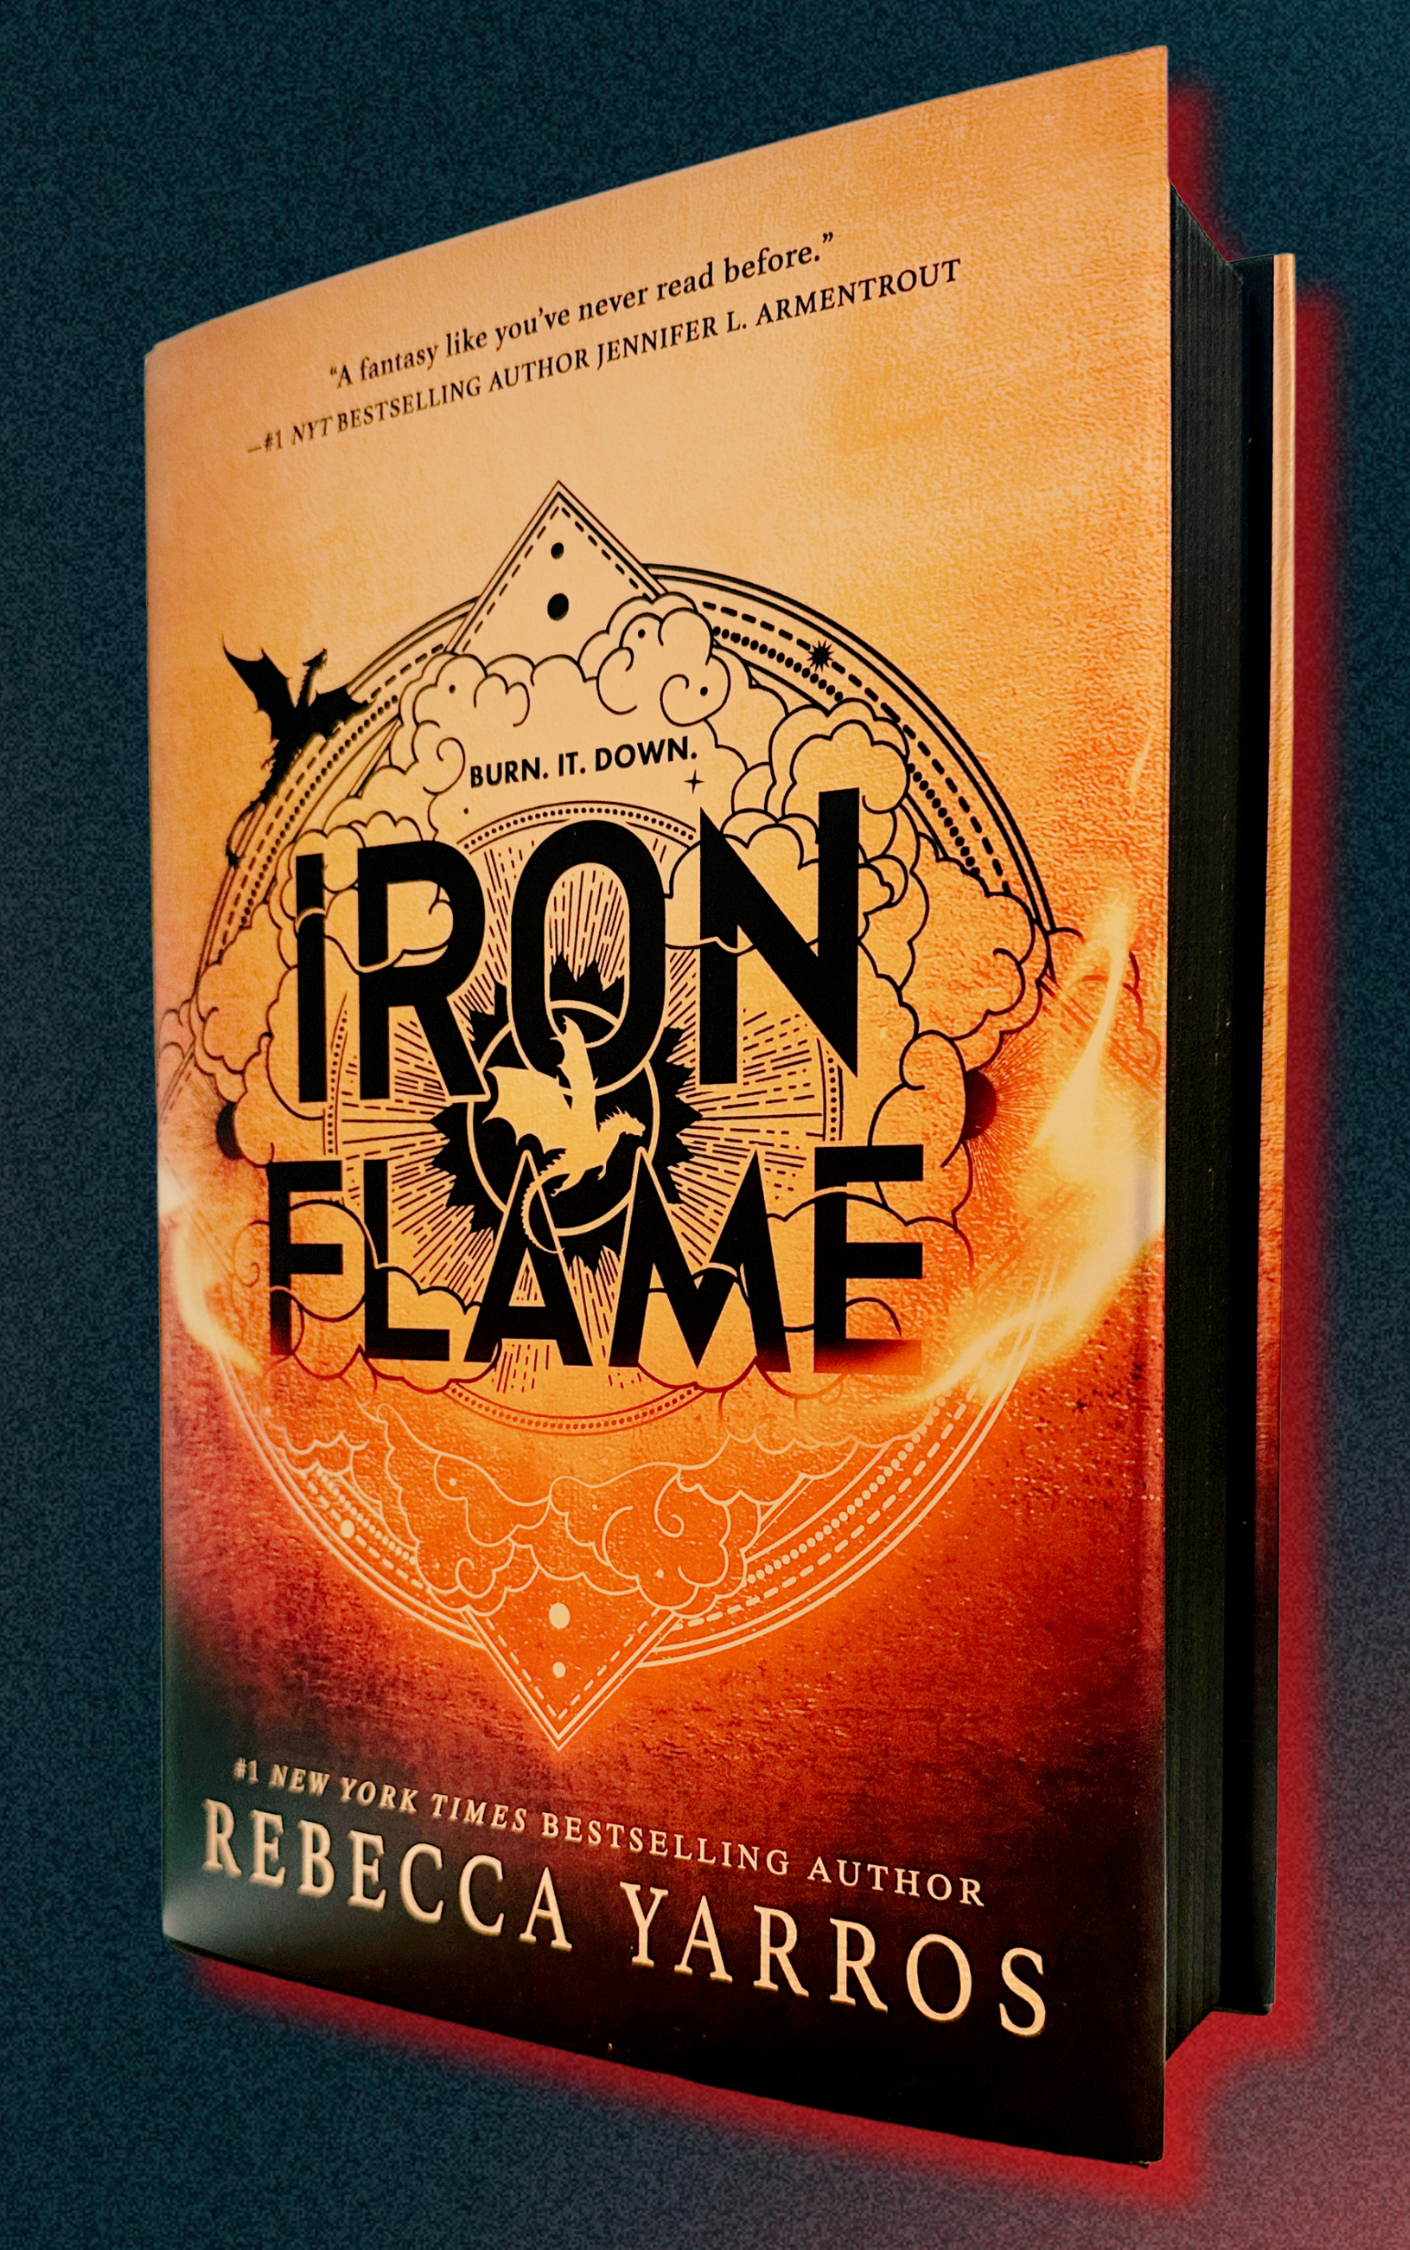 Iron Flame by Rebecca Yarros SPECIAL EDITON B&N Edition